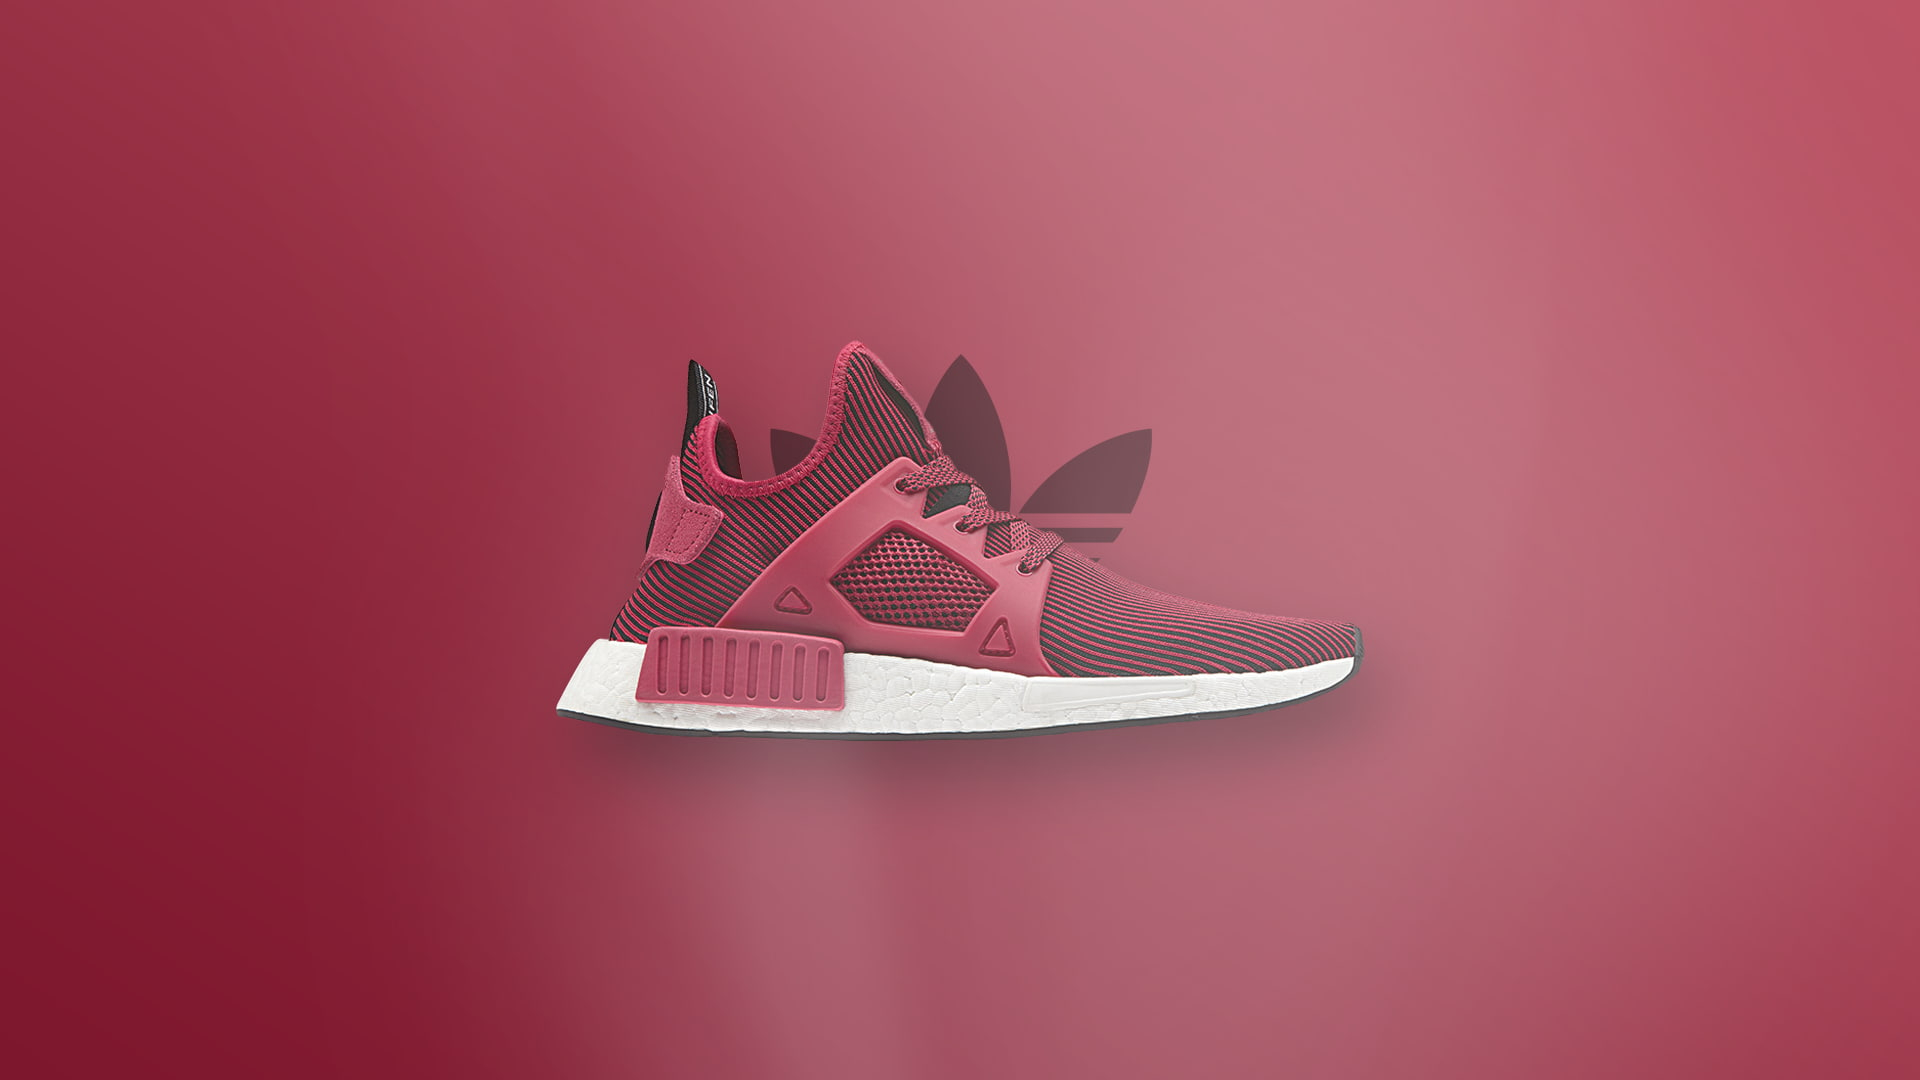 Adidas wallpaper, sneakers, pink shoes, NMD R1